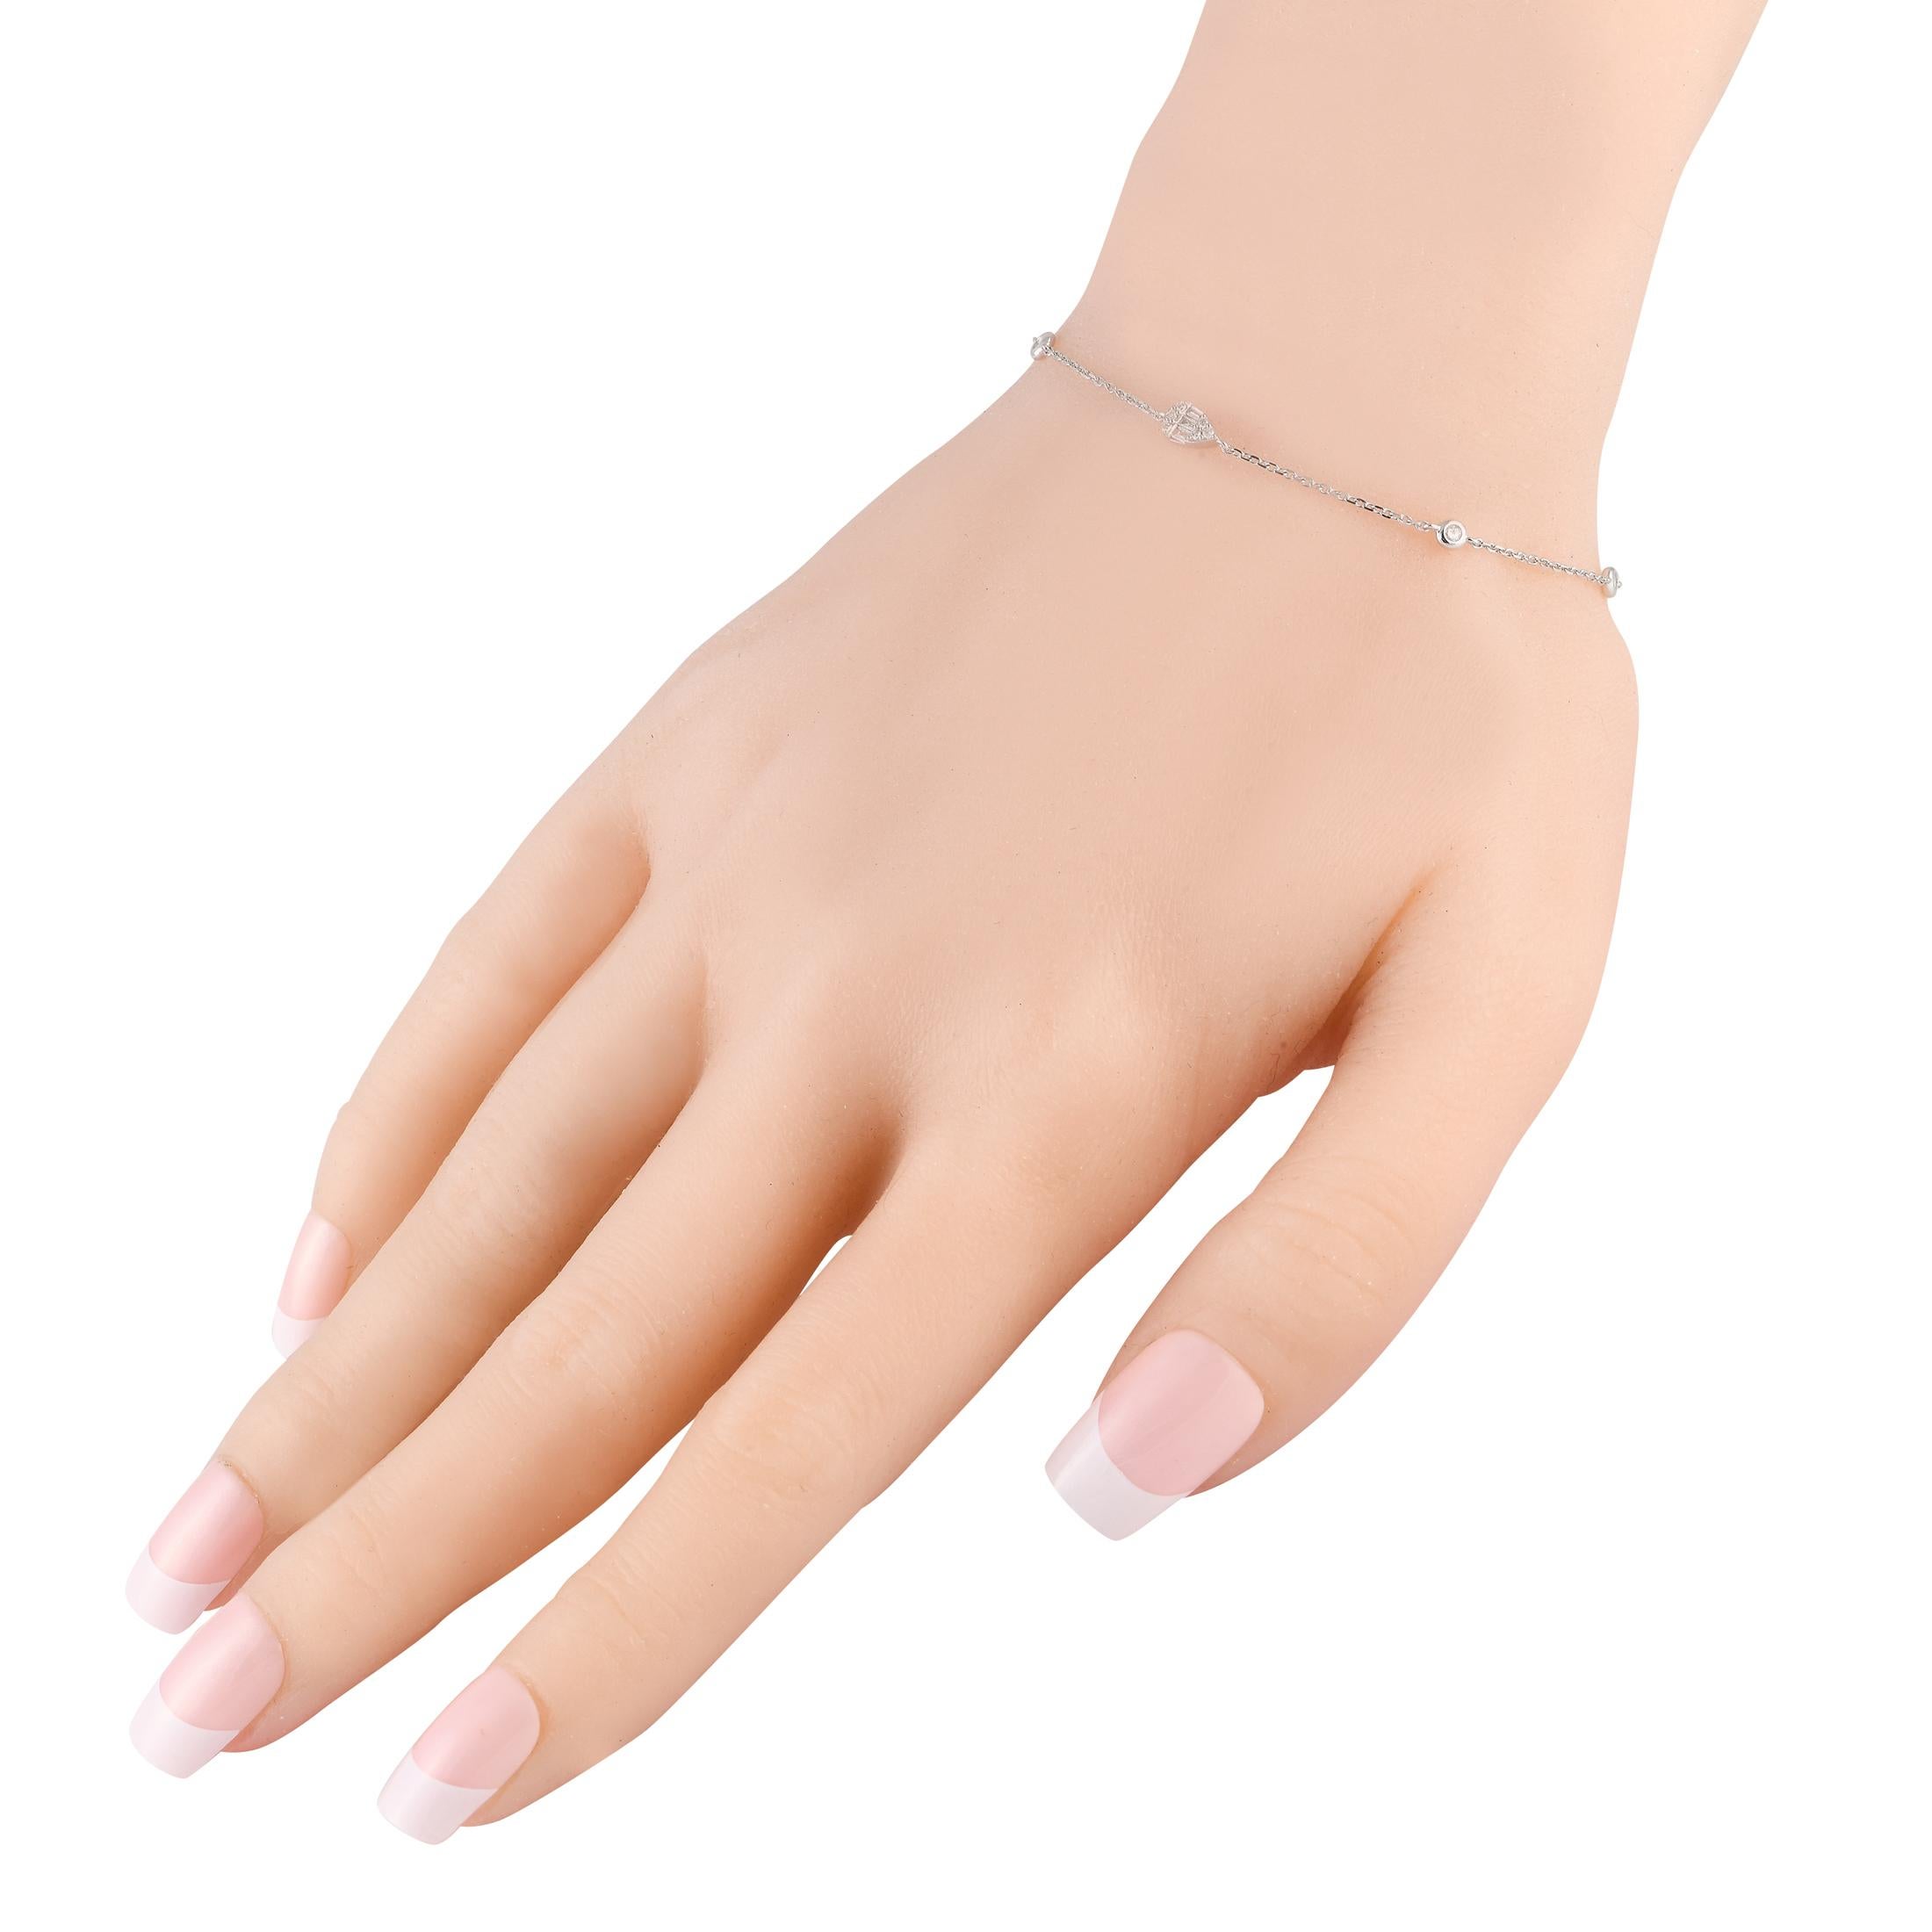 Just like your go-to basic white tee, this minimalist diamond bracelet is that easy, classic accessory you can wear anywhere. The white gold chain bracelet measures 7 inches long and has a lobster clasp. It shimmers with 0.15 carats of diamonds, set